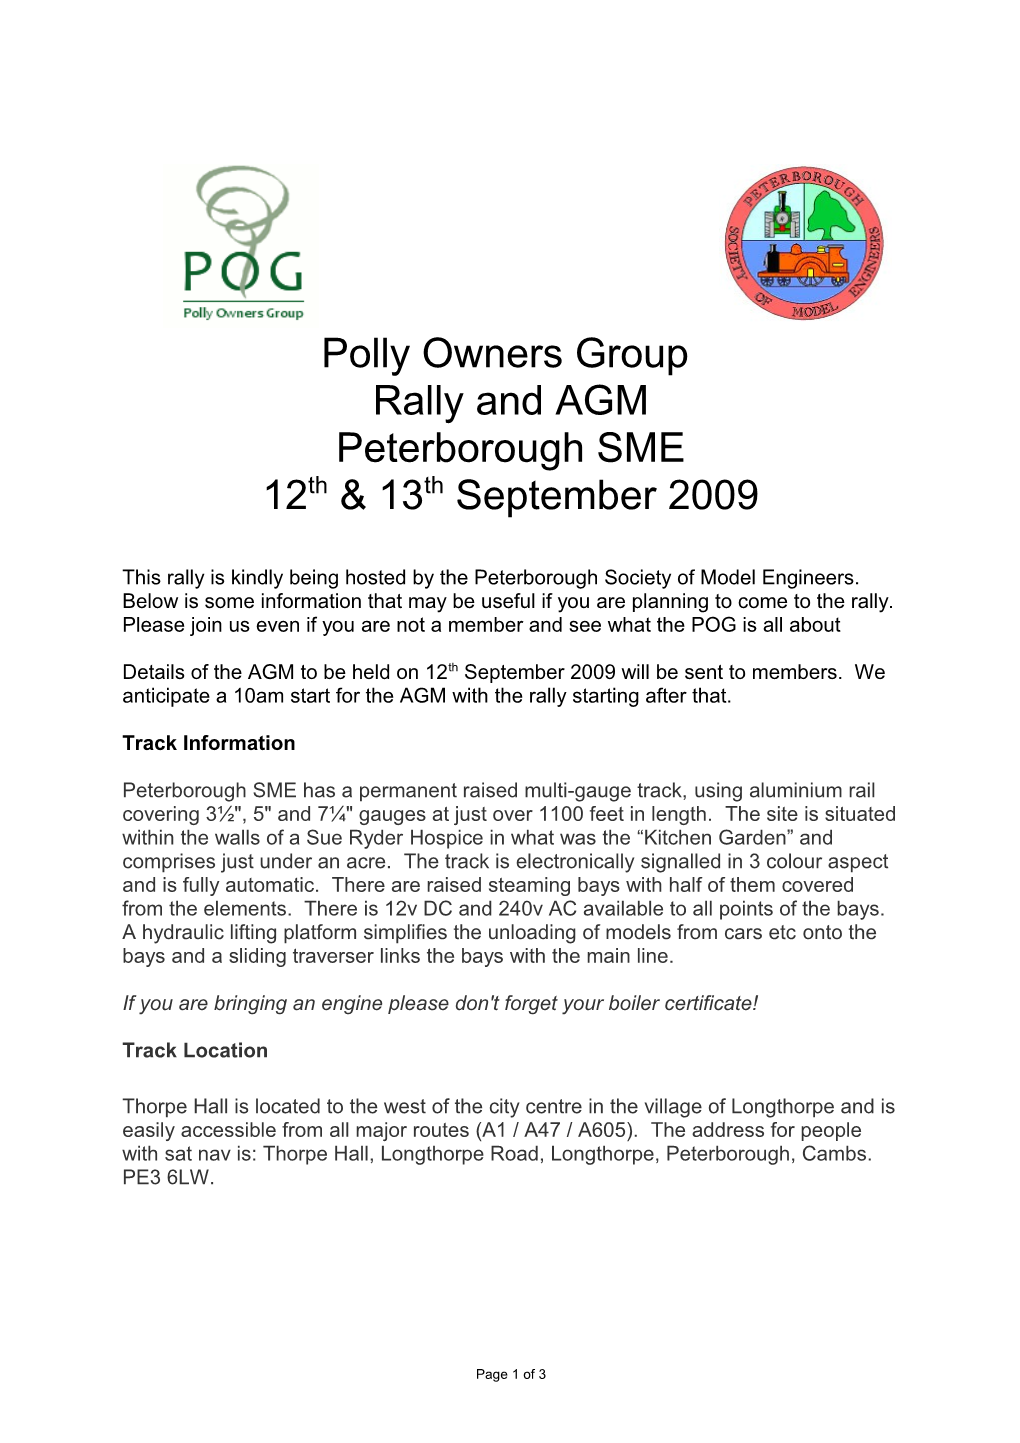 Polly Owners Group